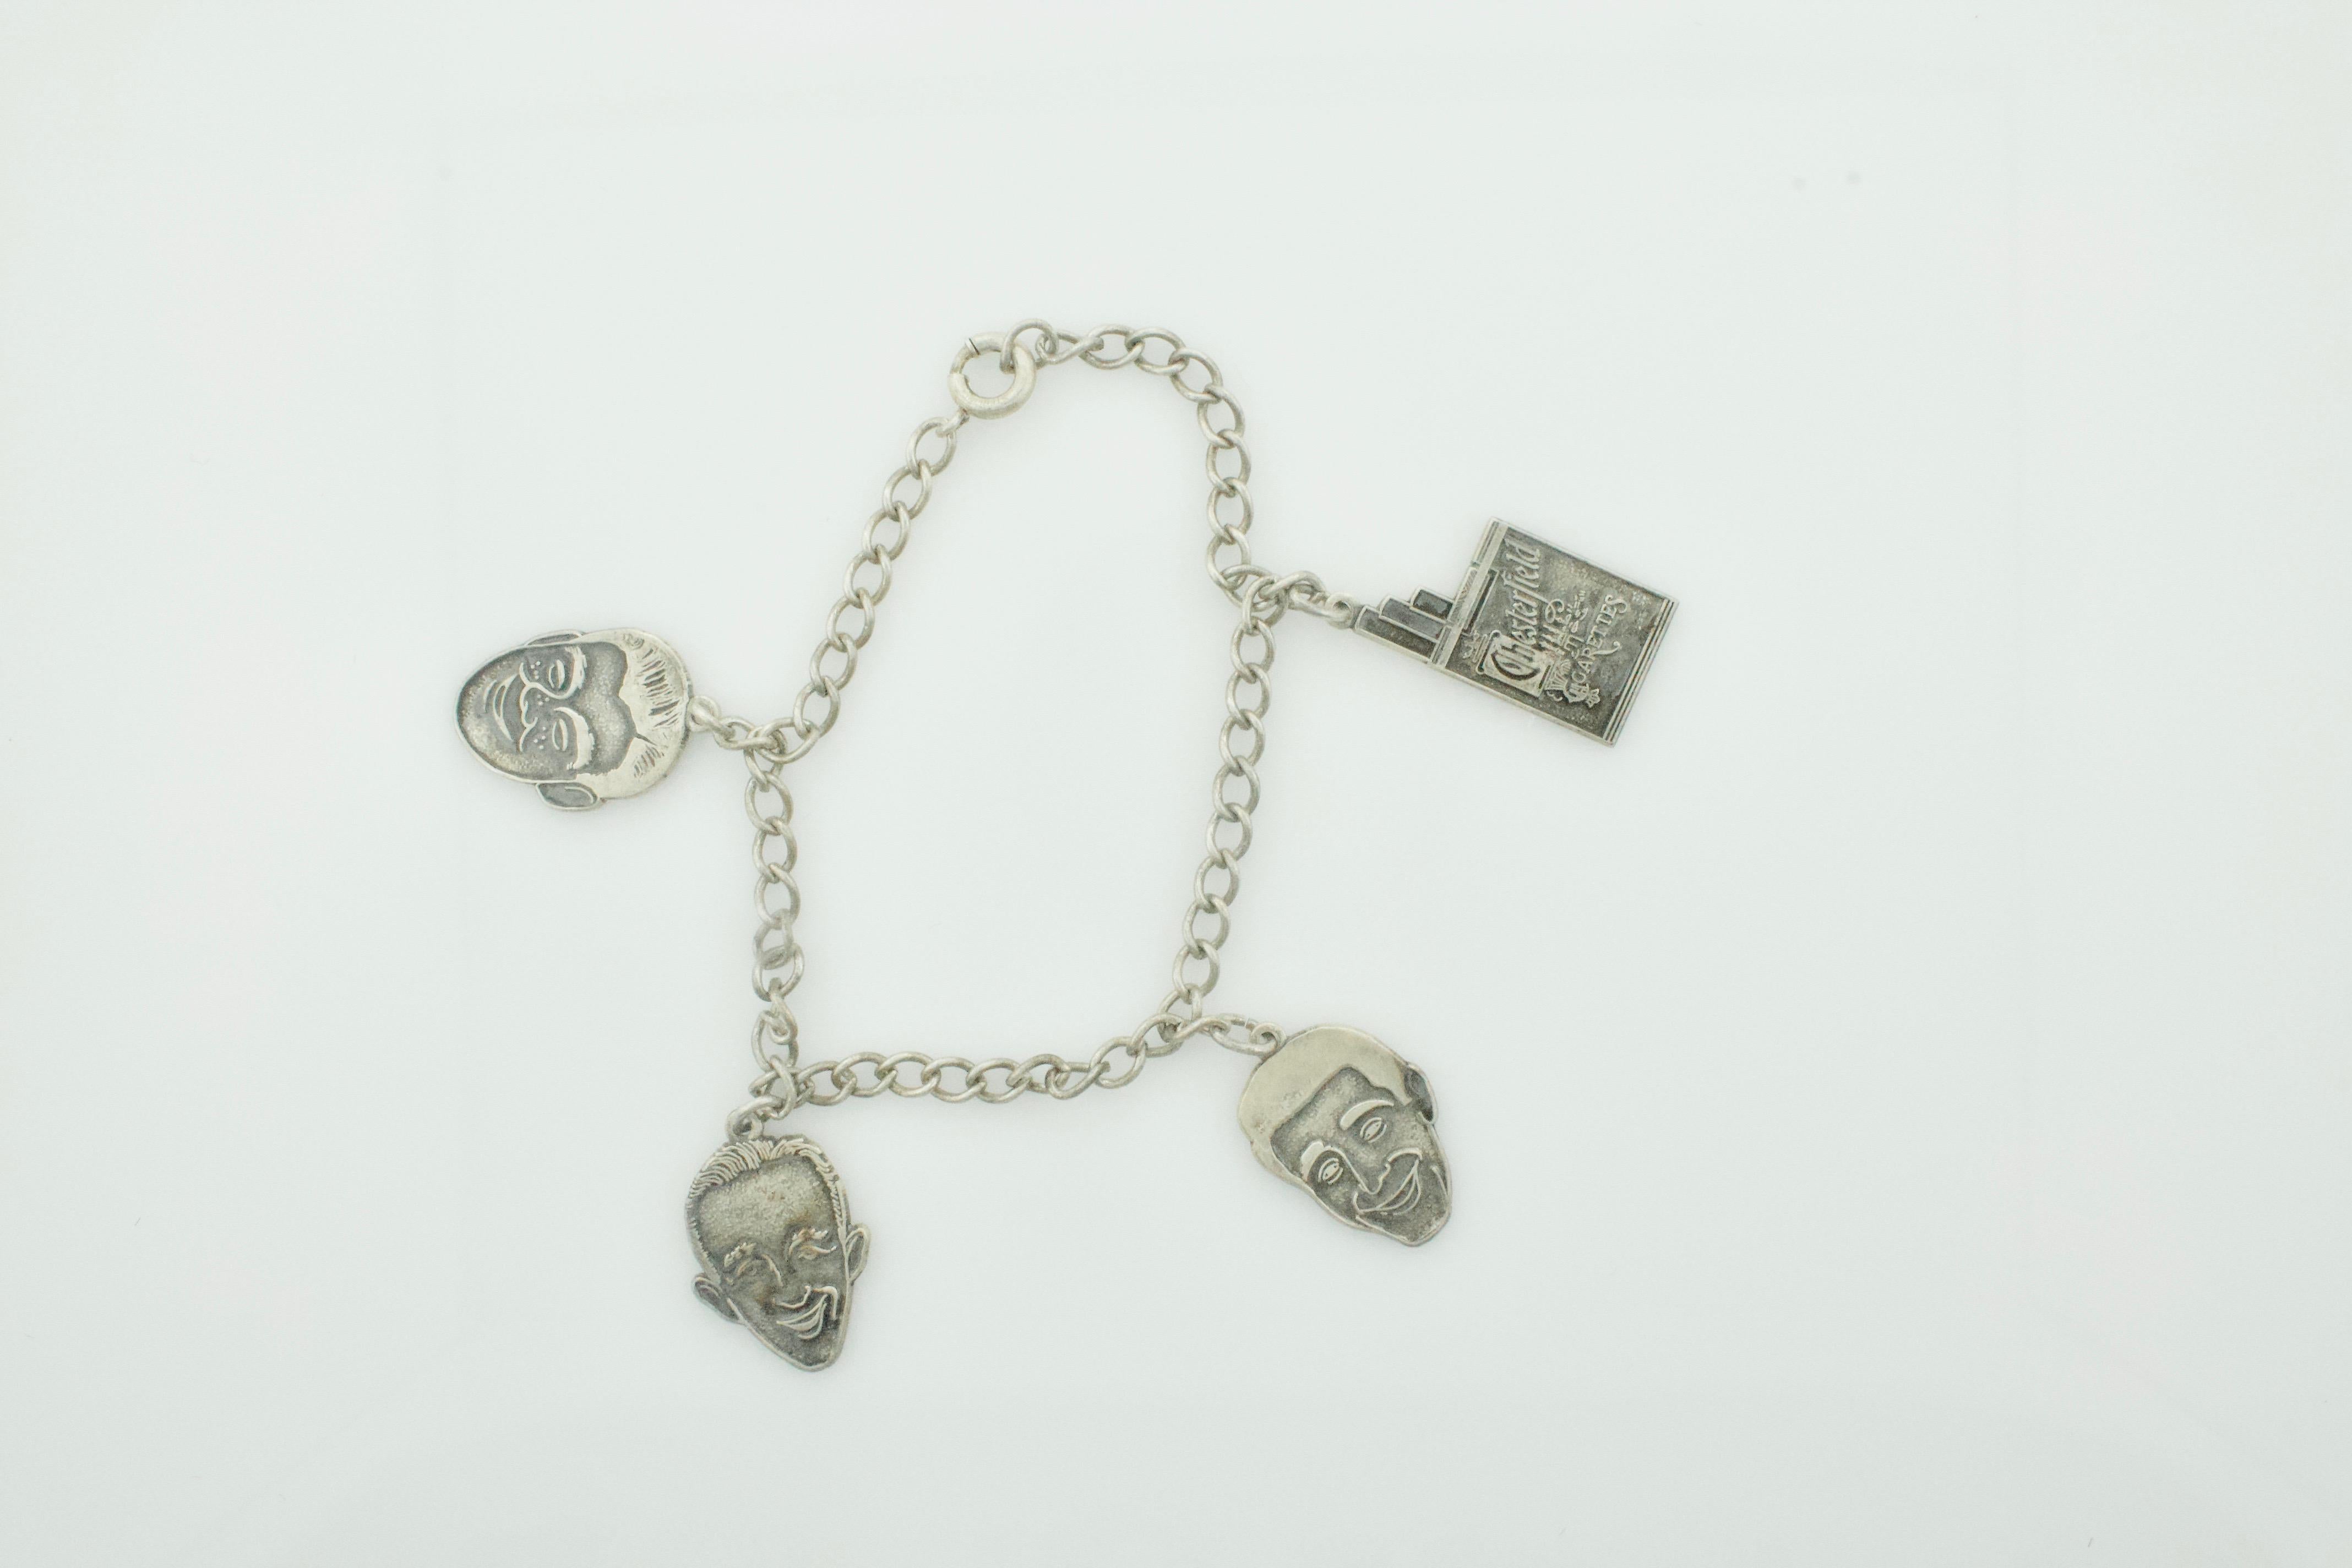 American Celebrity Charm Bracelet in Sterling Silver 7 Inches in Length  
National Association of Tobacco Distributors. Every year they held a convention and in 1950 the convention was held in Chicago. This cigarette pack charm was on the chain with